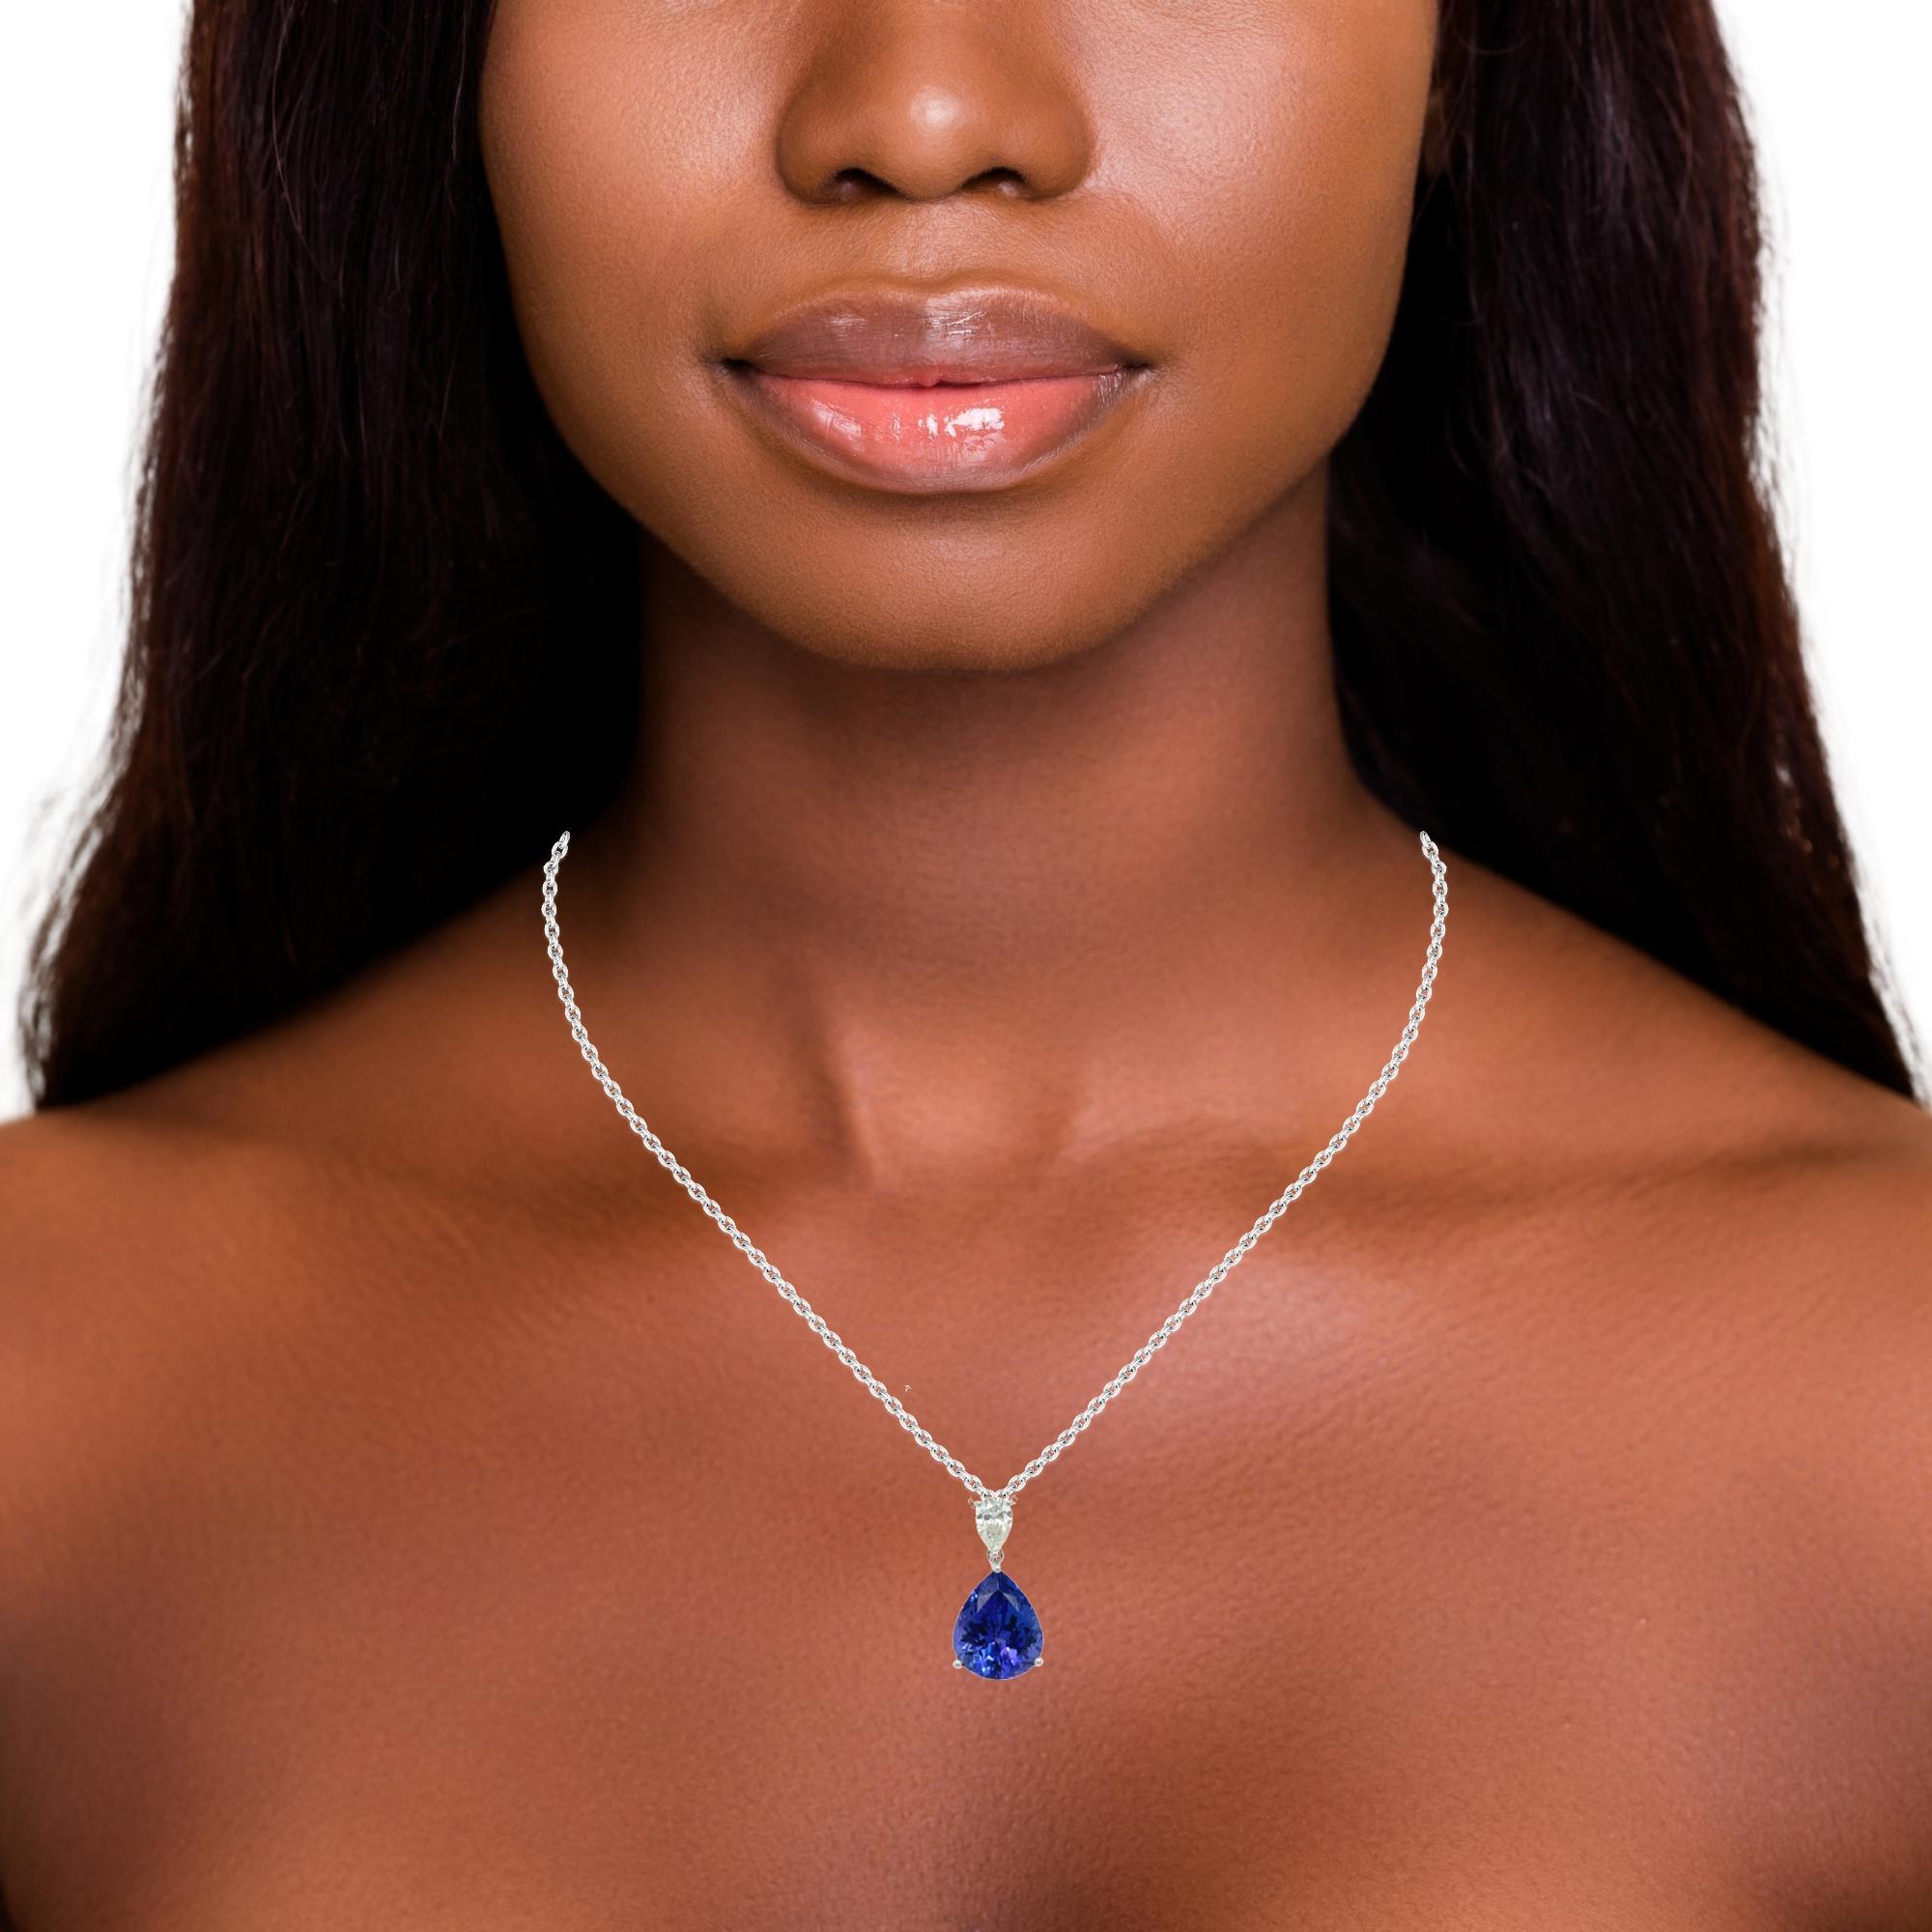 This stunning necklace has a deep colored 12x10mm pear shape AAA quality Tanzanite with a 0.46 ct pear shape top quality shimmering diamond.  Gold chain is included. Pendant is brand new with detailed tags attached. It comes in a beautiful box ready